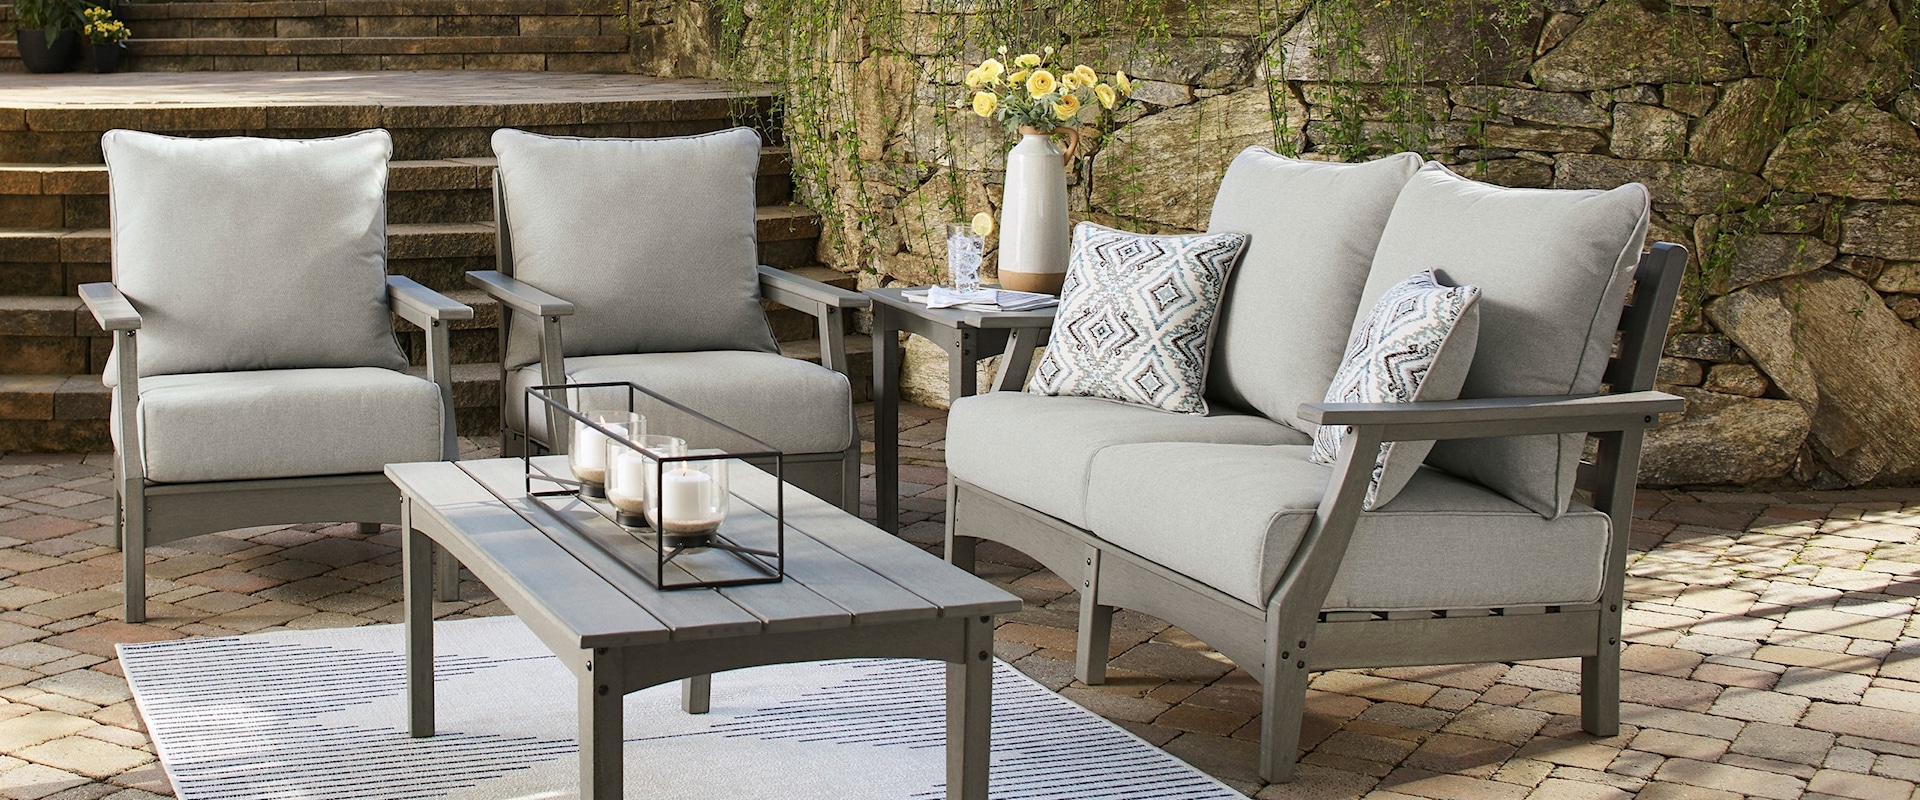 Outdoor Loveseat, 2 Chairs, and Table Set